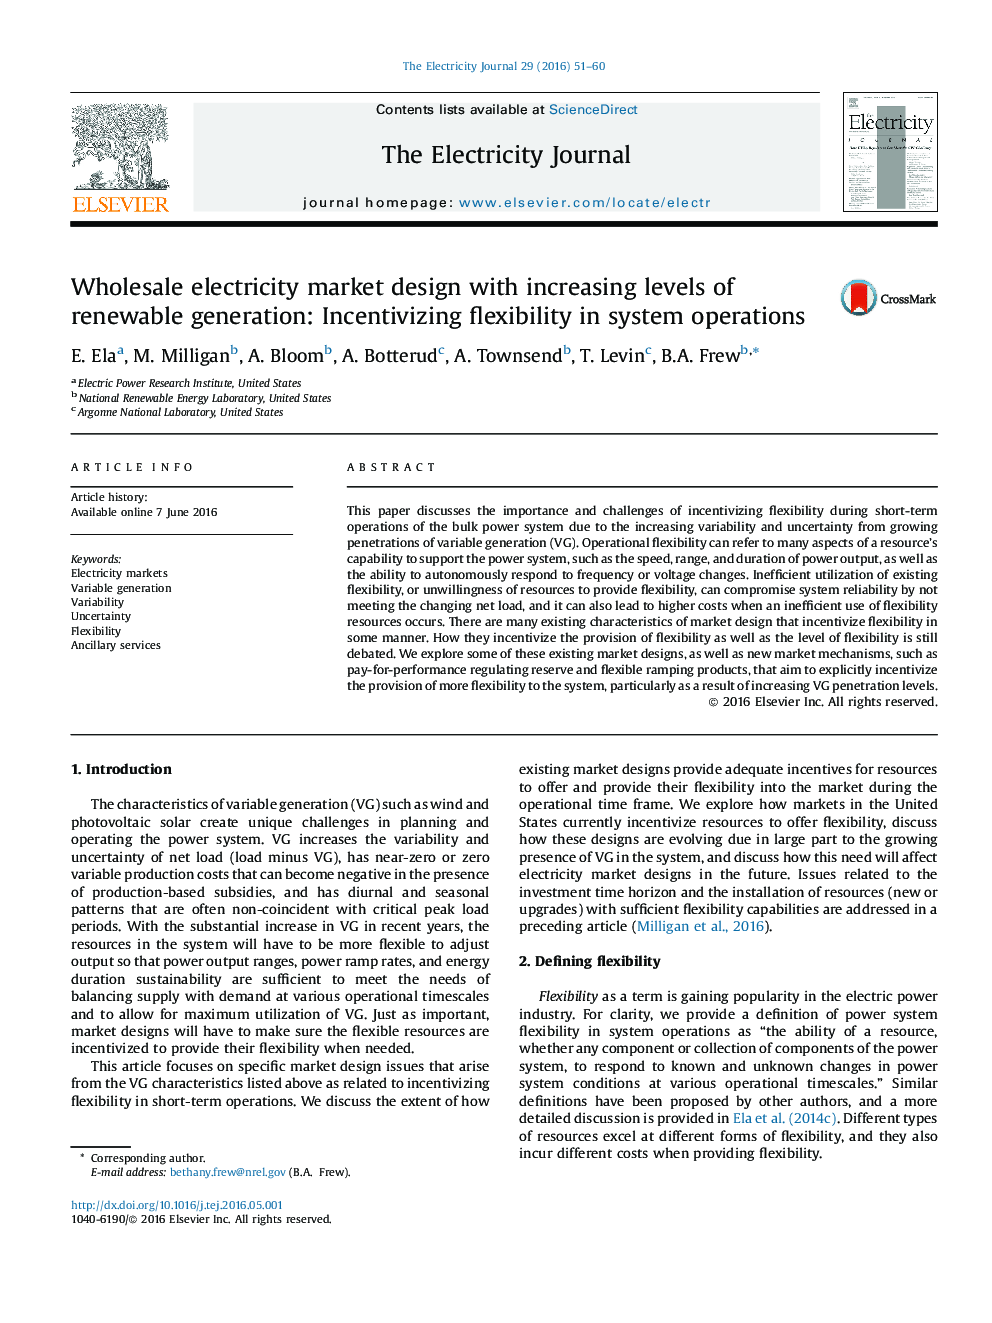 Wholesale electricity market design with increasing levels of renewable generation: Incentivizing flexibility in system operations